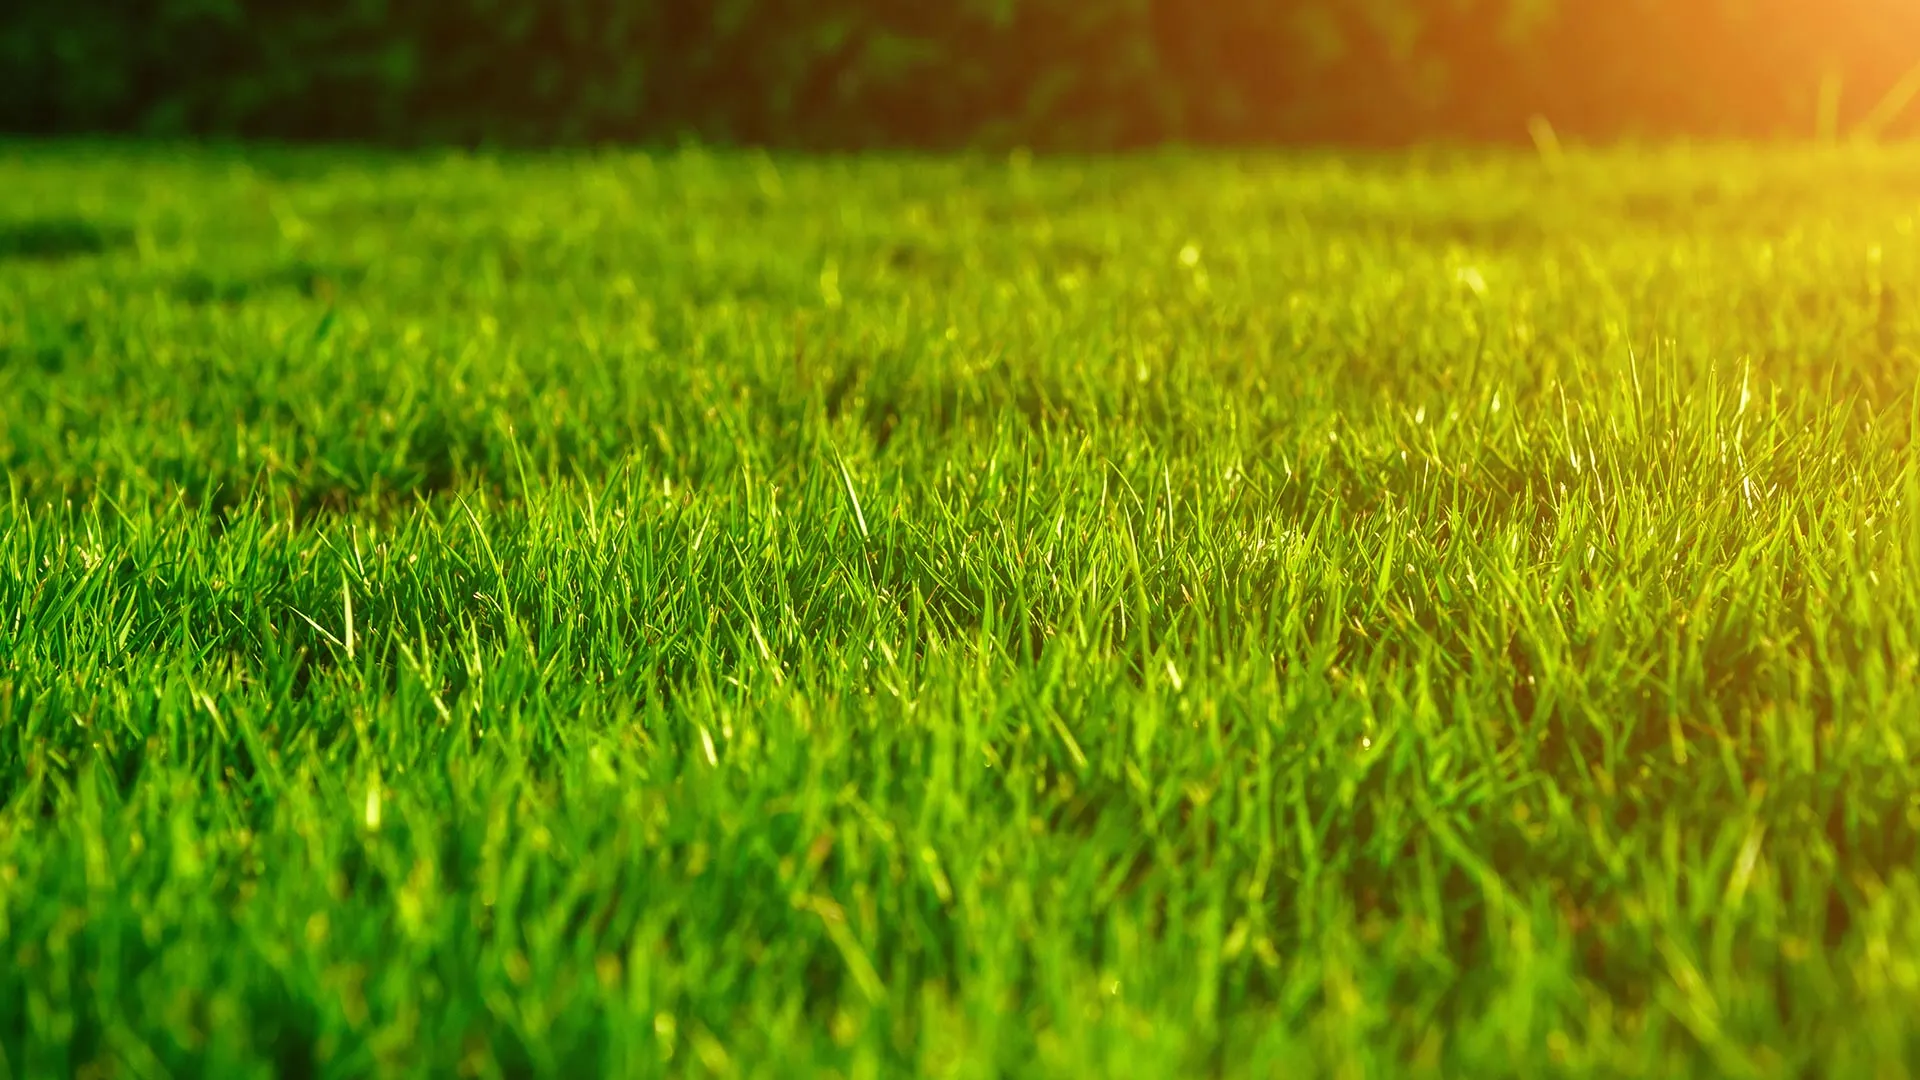 Look for These 3 Things Before Hiring a Company to Mow Your Lawn